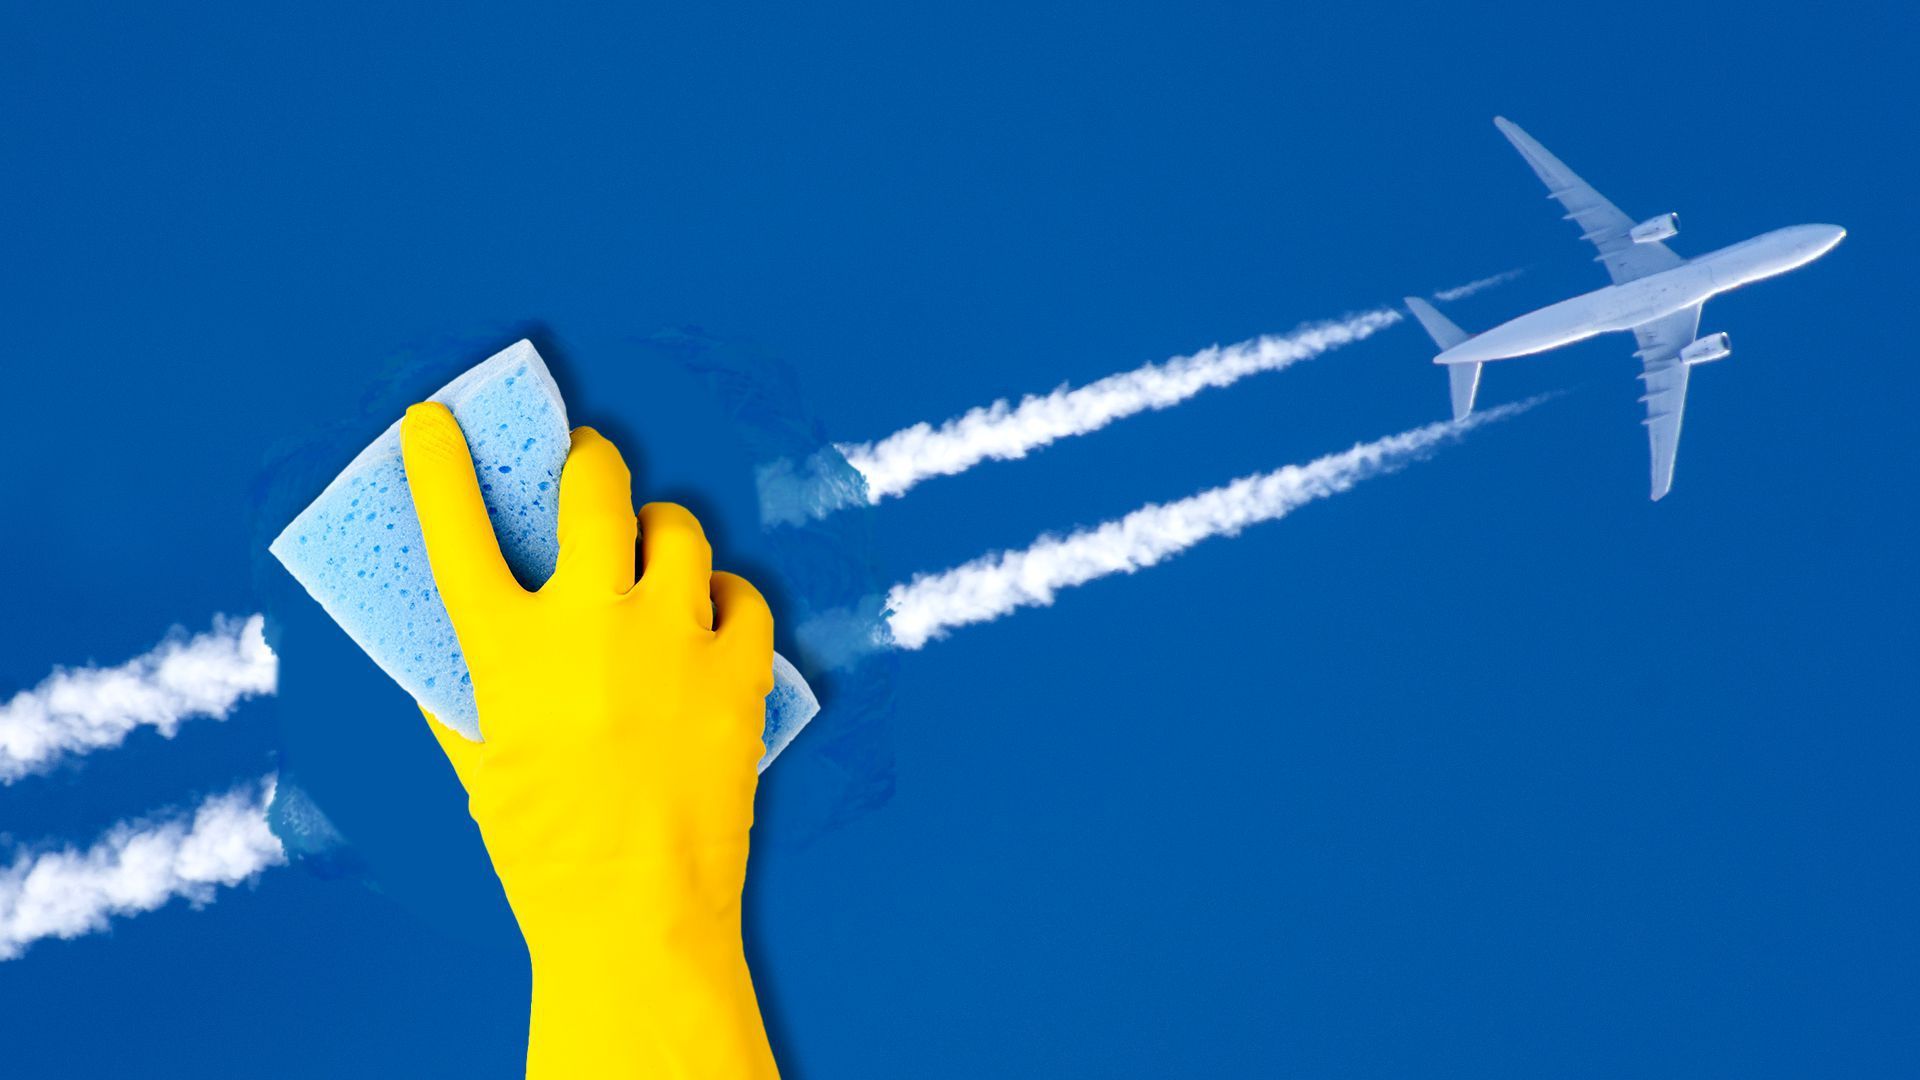 Illustration of condensation trails from a jet being wiped away with a sponge.